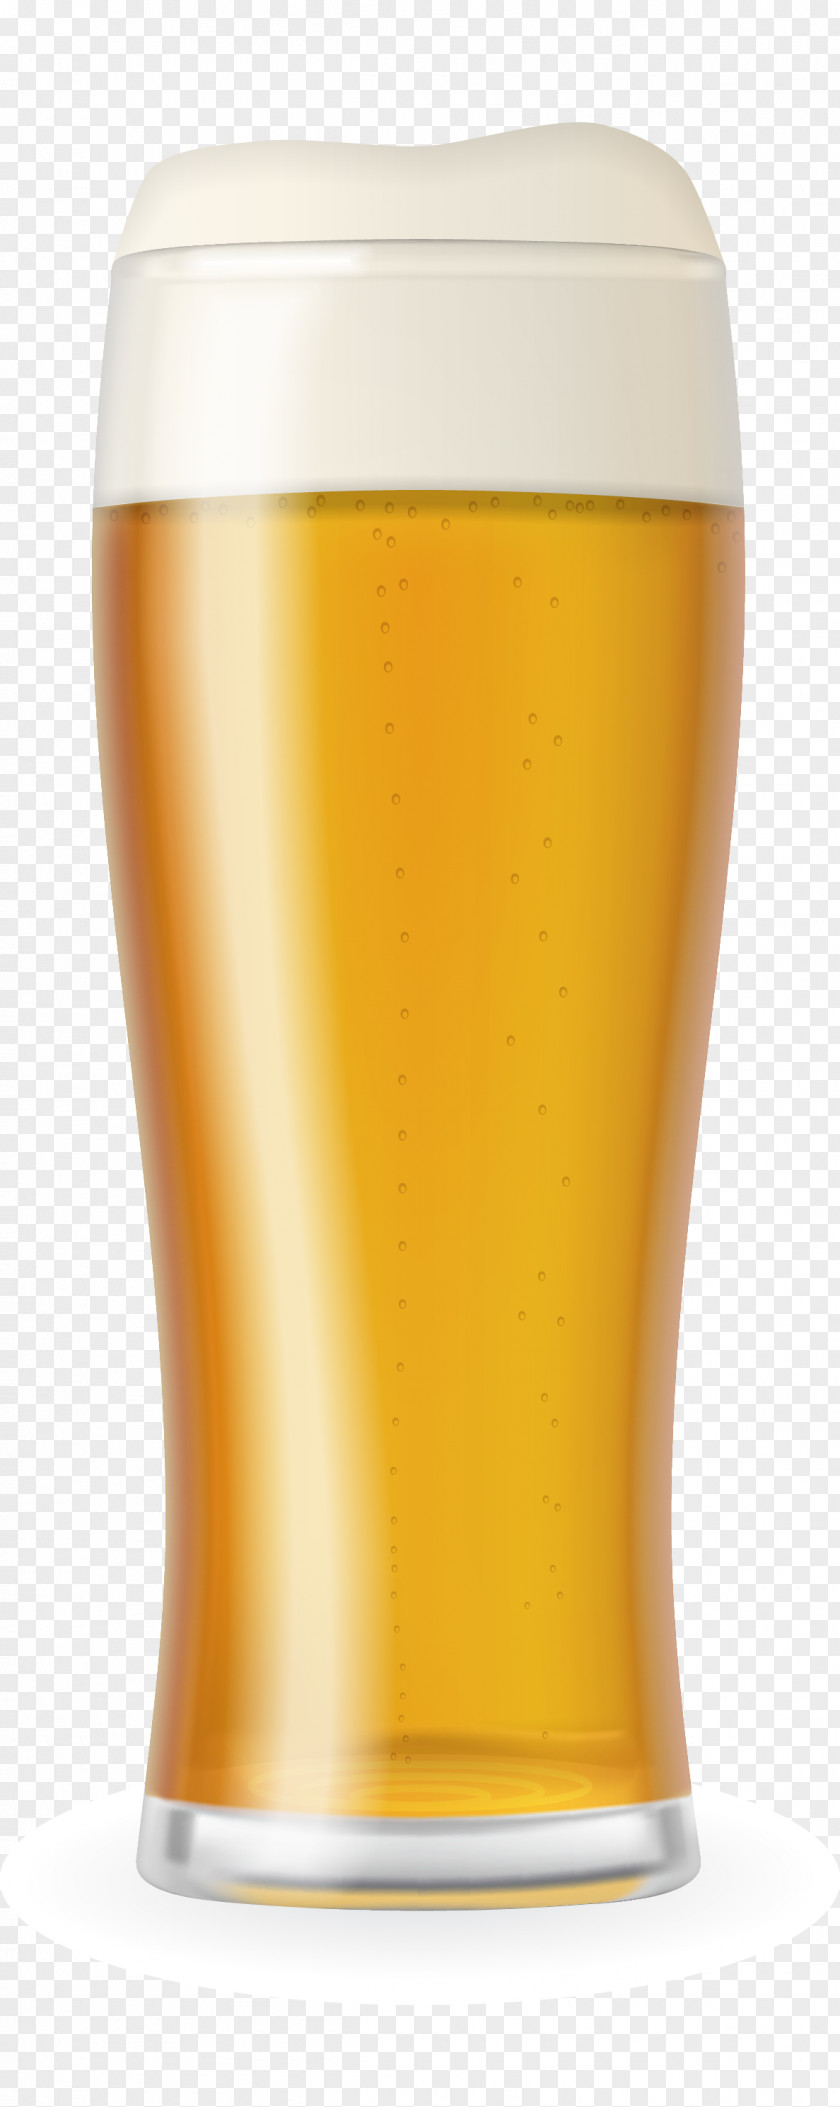 Glass Wheat Beer Pint Glasses PNG